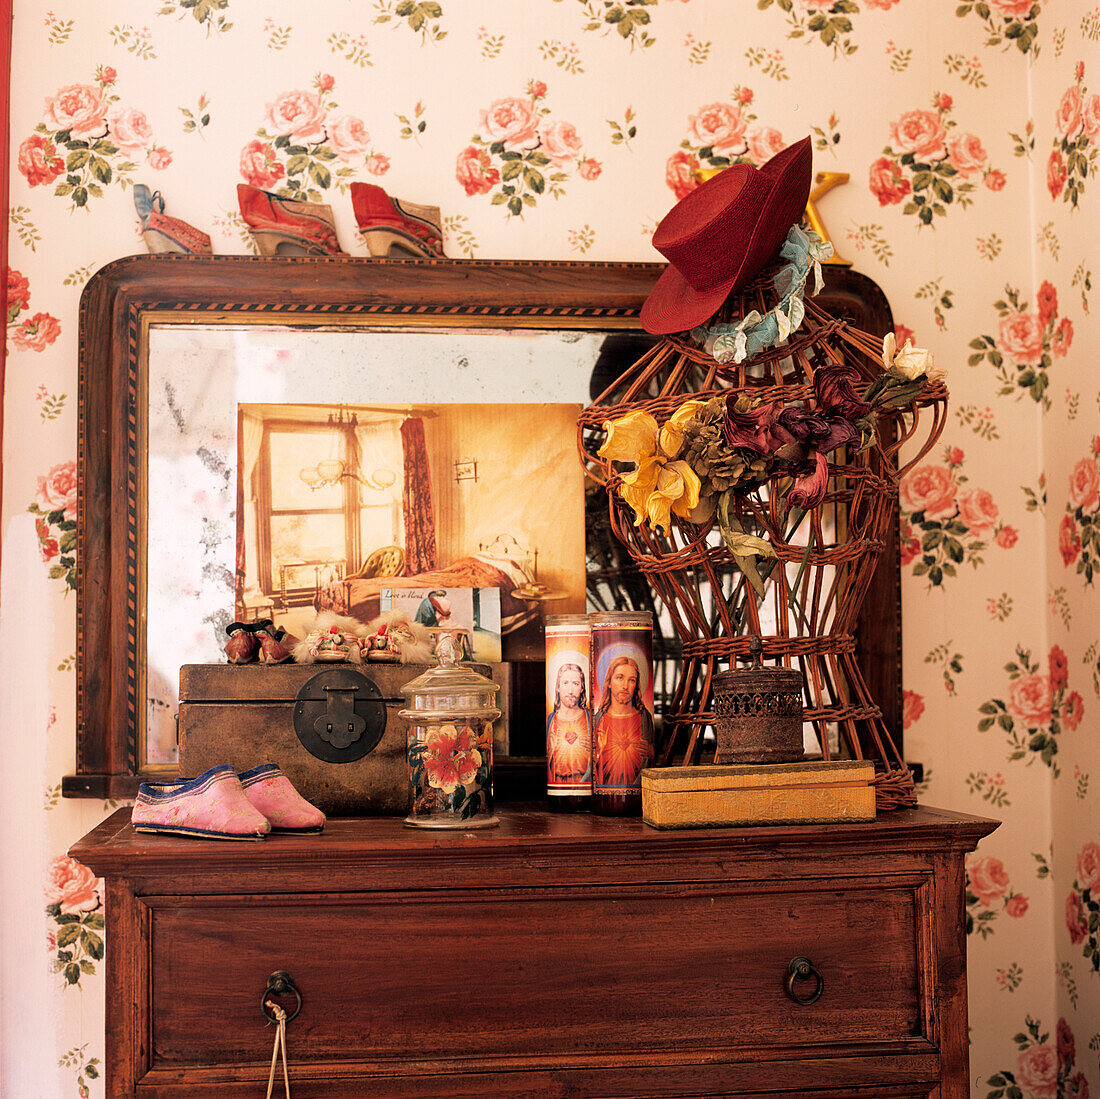 Dressing table in floral bedroom